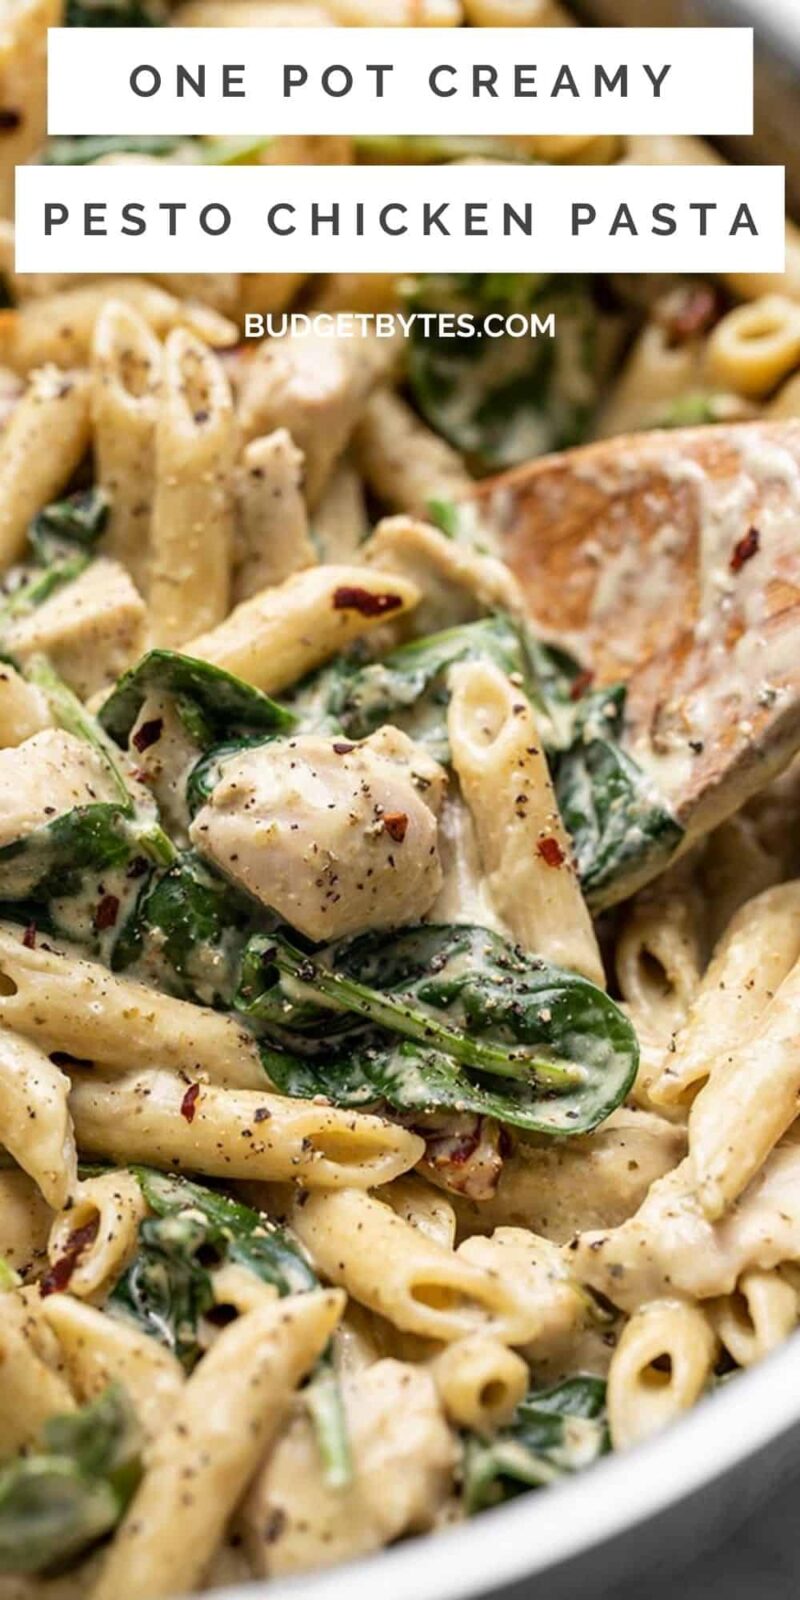 close up of creamy pesto chicken pasta, title text at the top